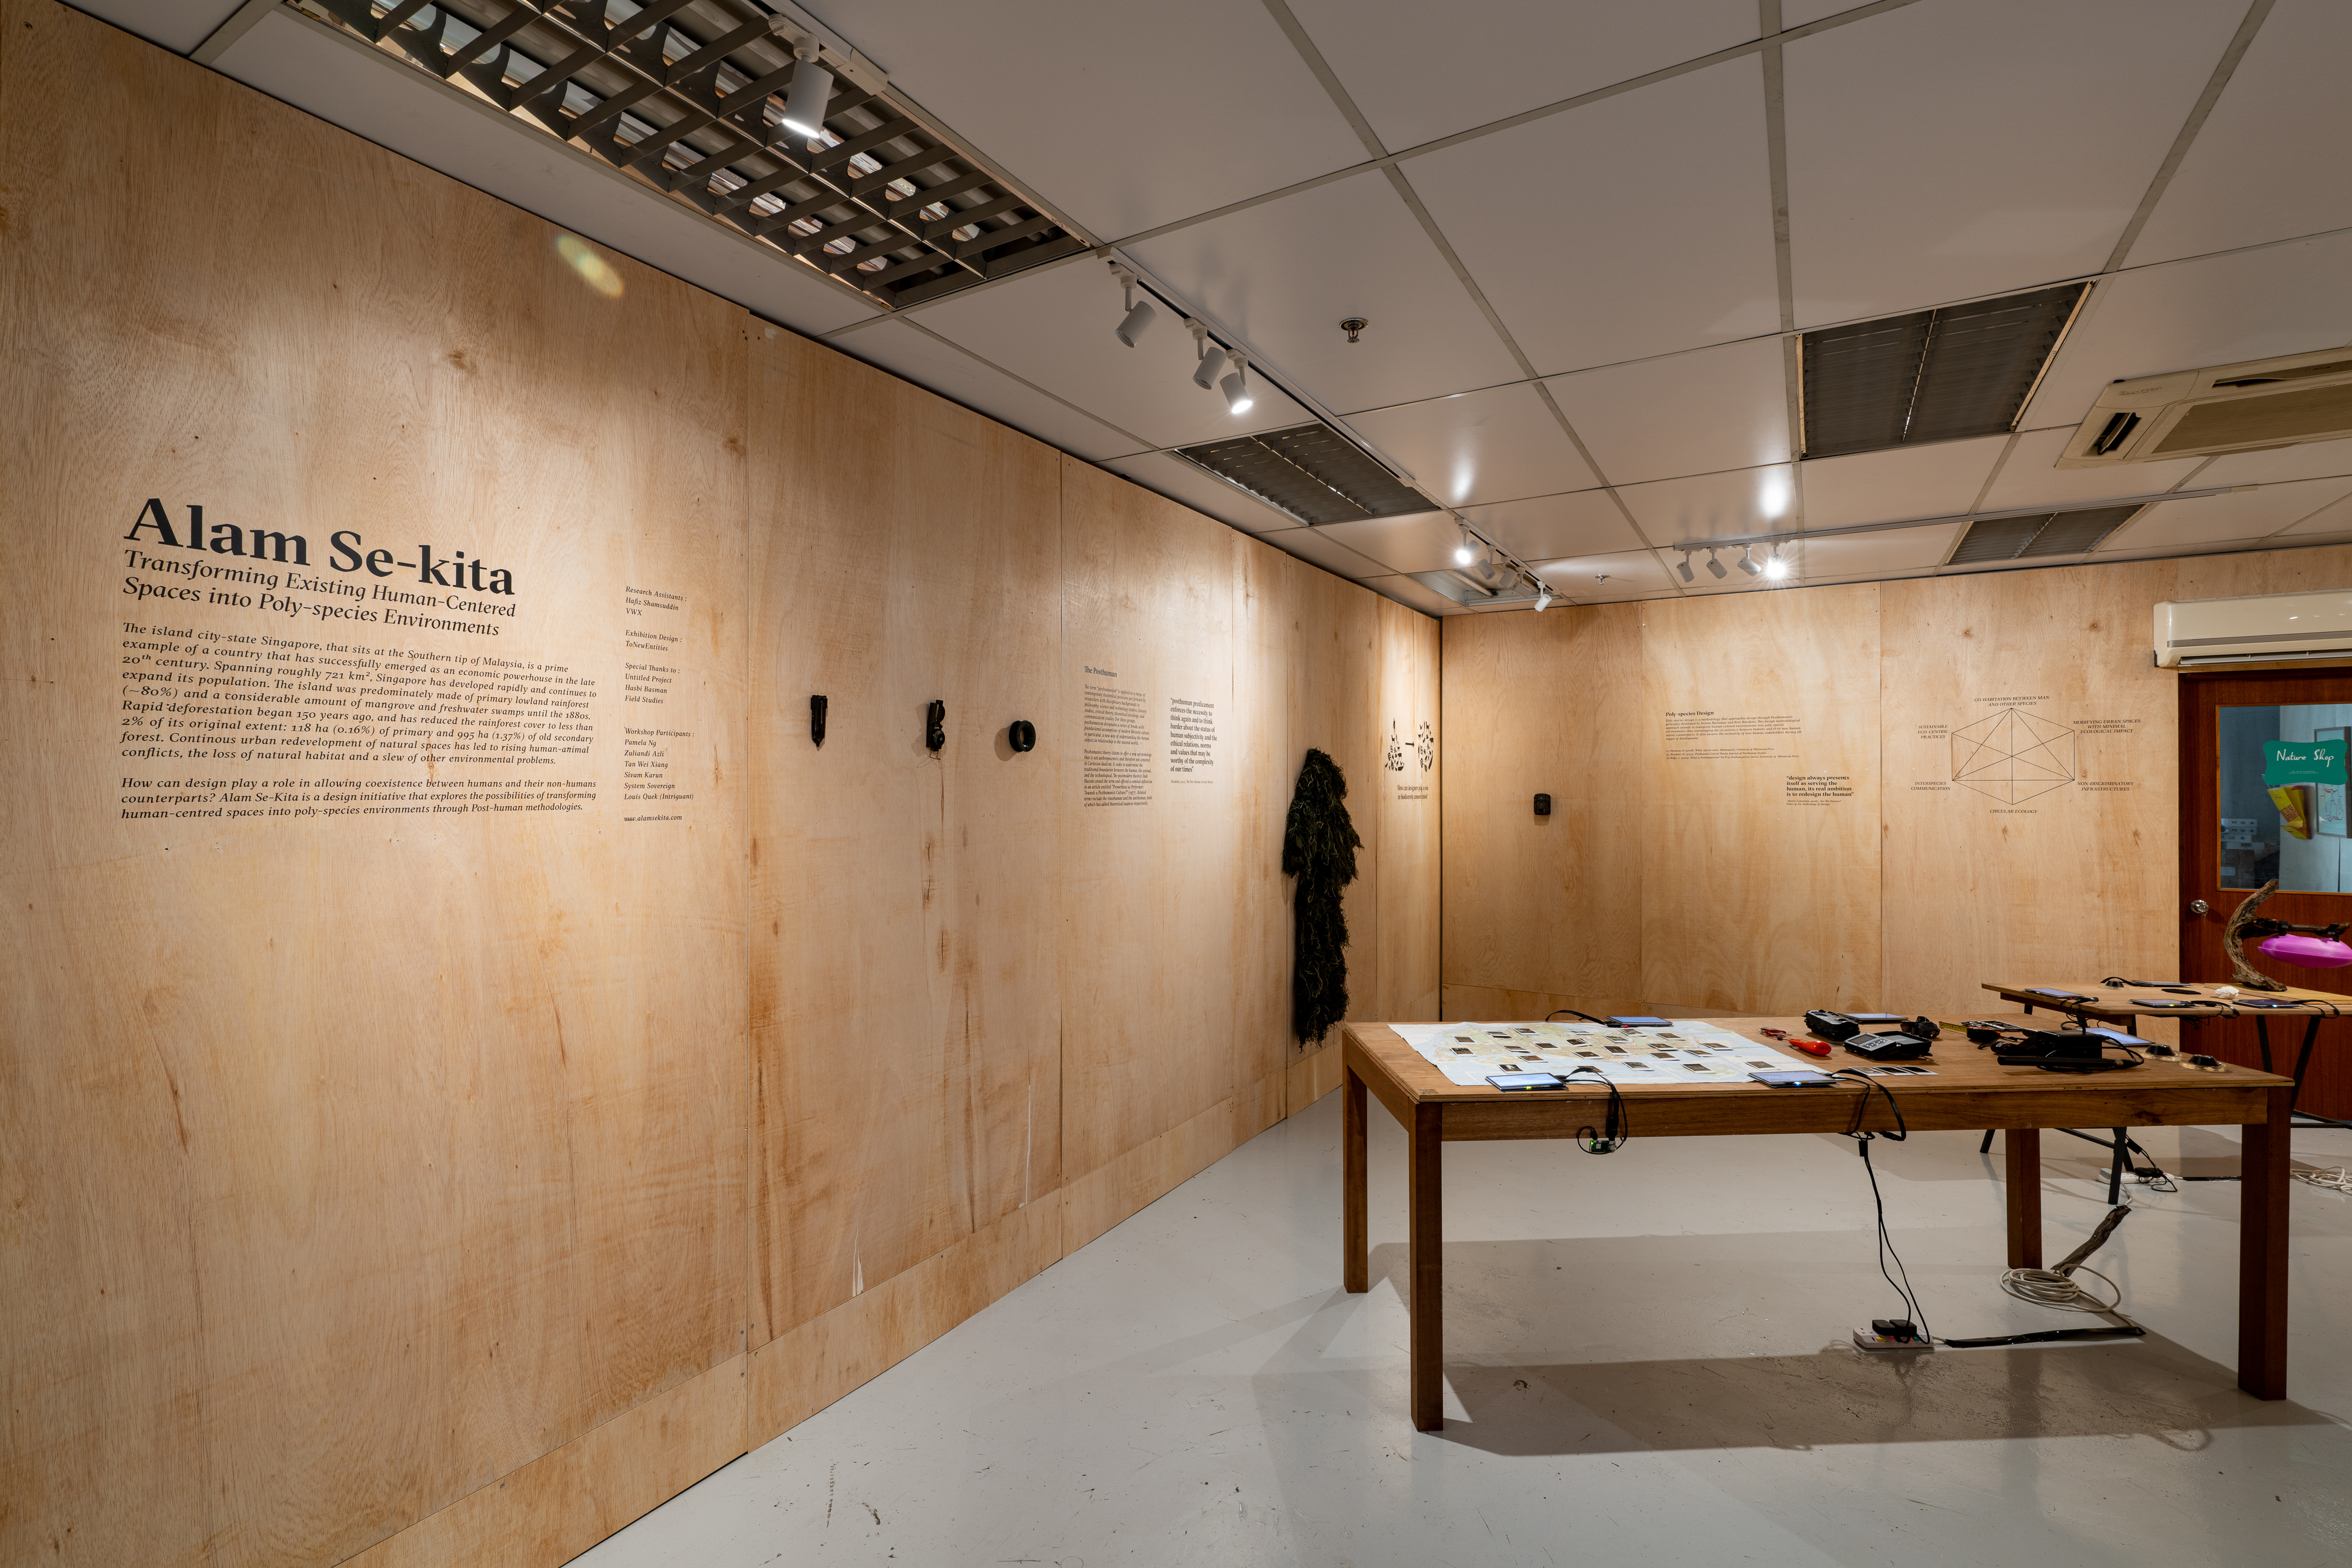 Installation view of Alam Se-kita, which featured works by five artists, including LASALLE BA(Hons) Product Design alumnus Tan Wei Xiang.